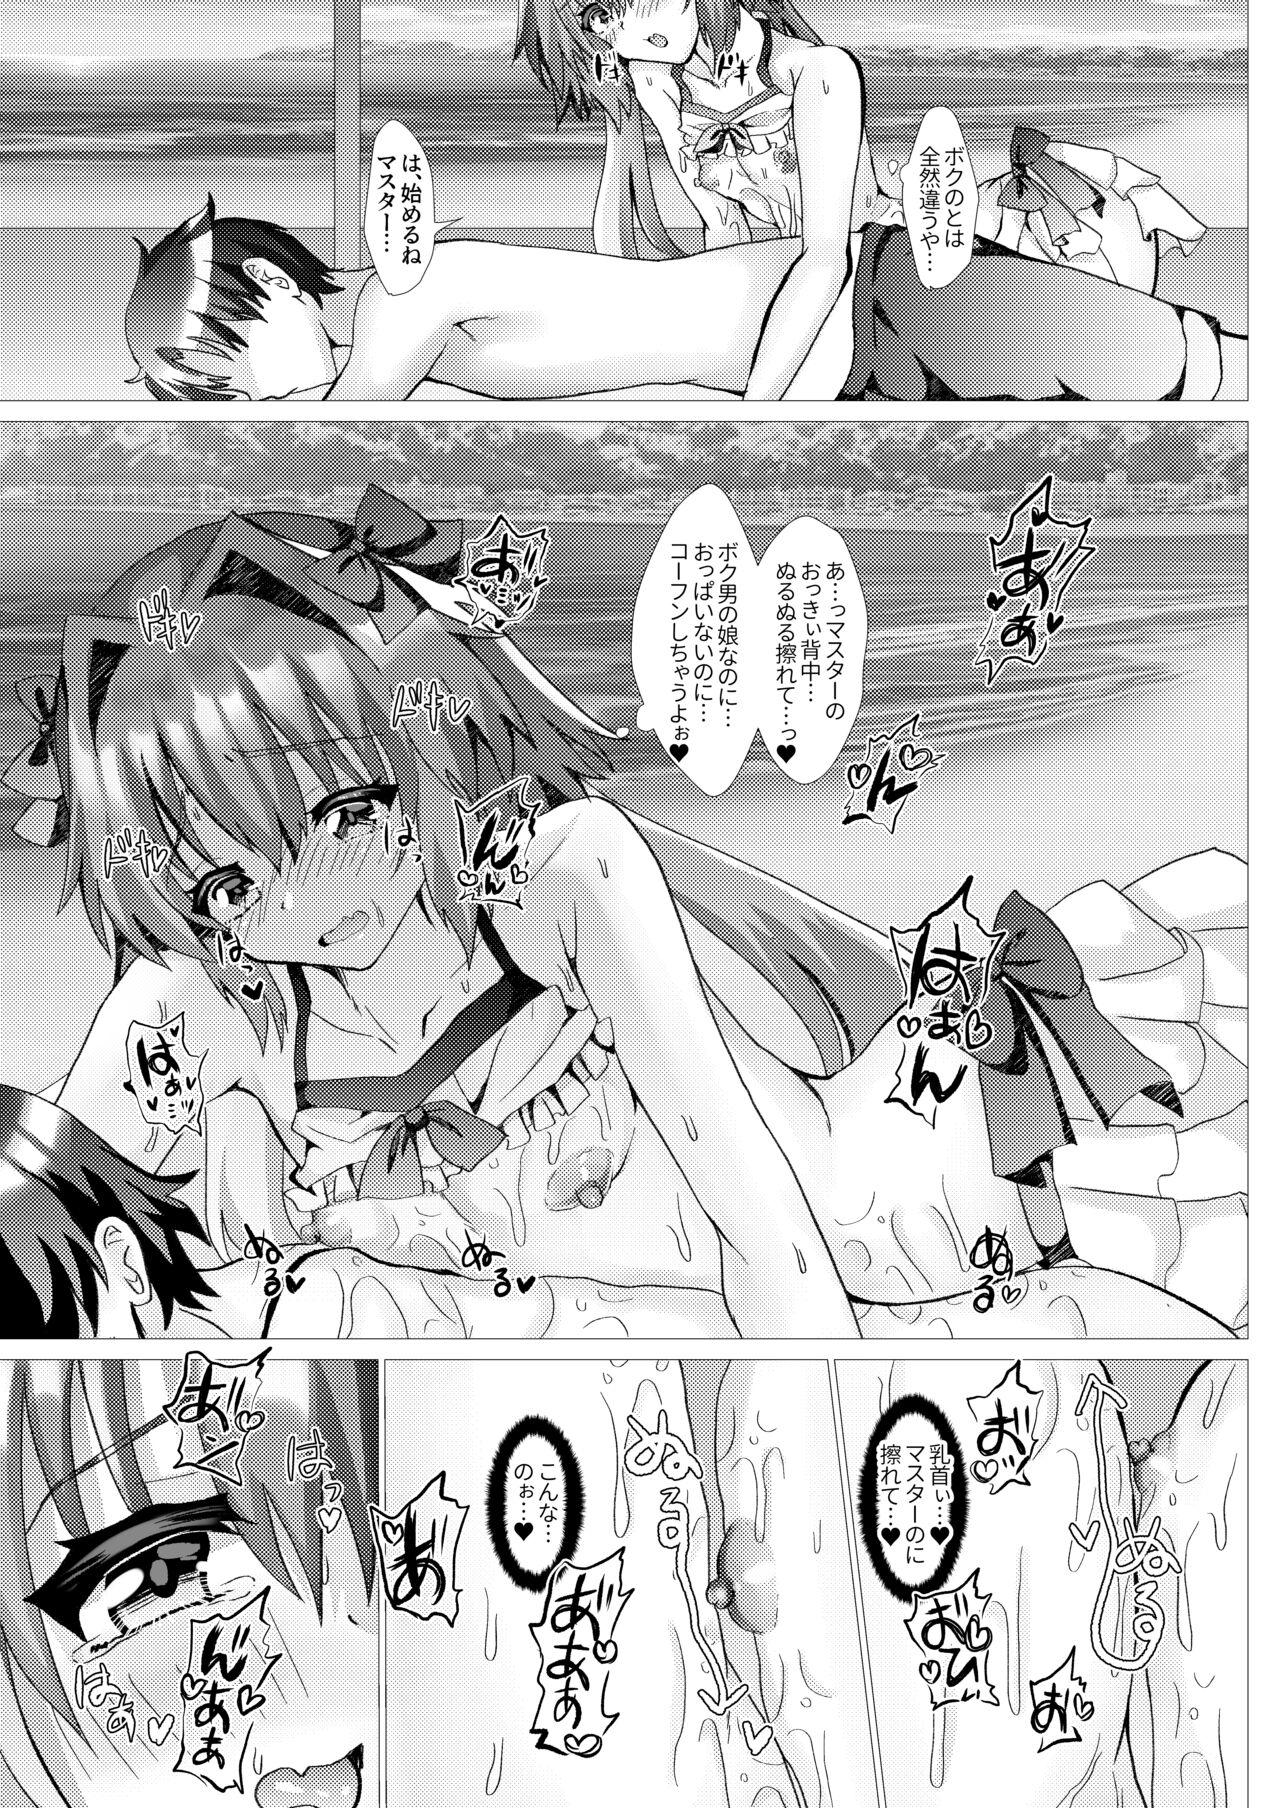 Sex Party Astolfo to Summer Vacation + Omake - Fate grand order Caught - Page 6